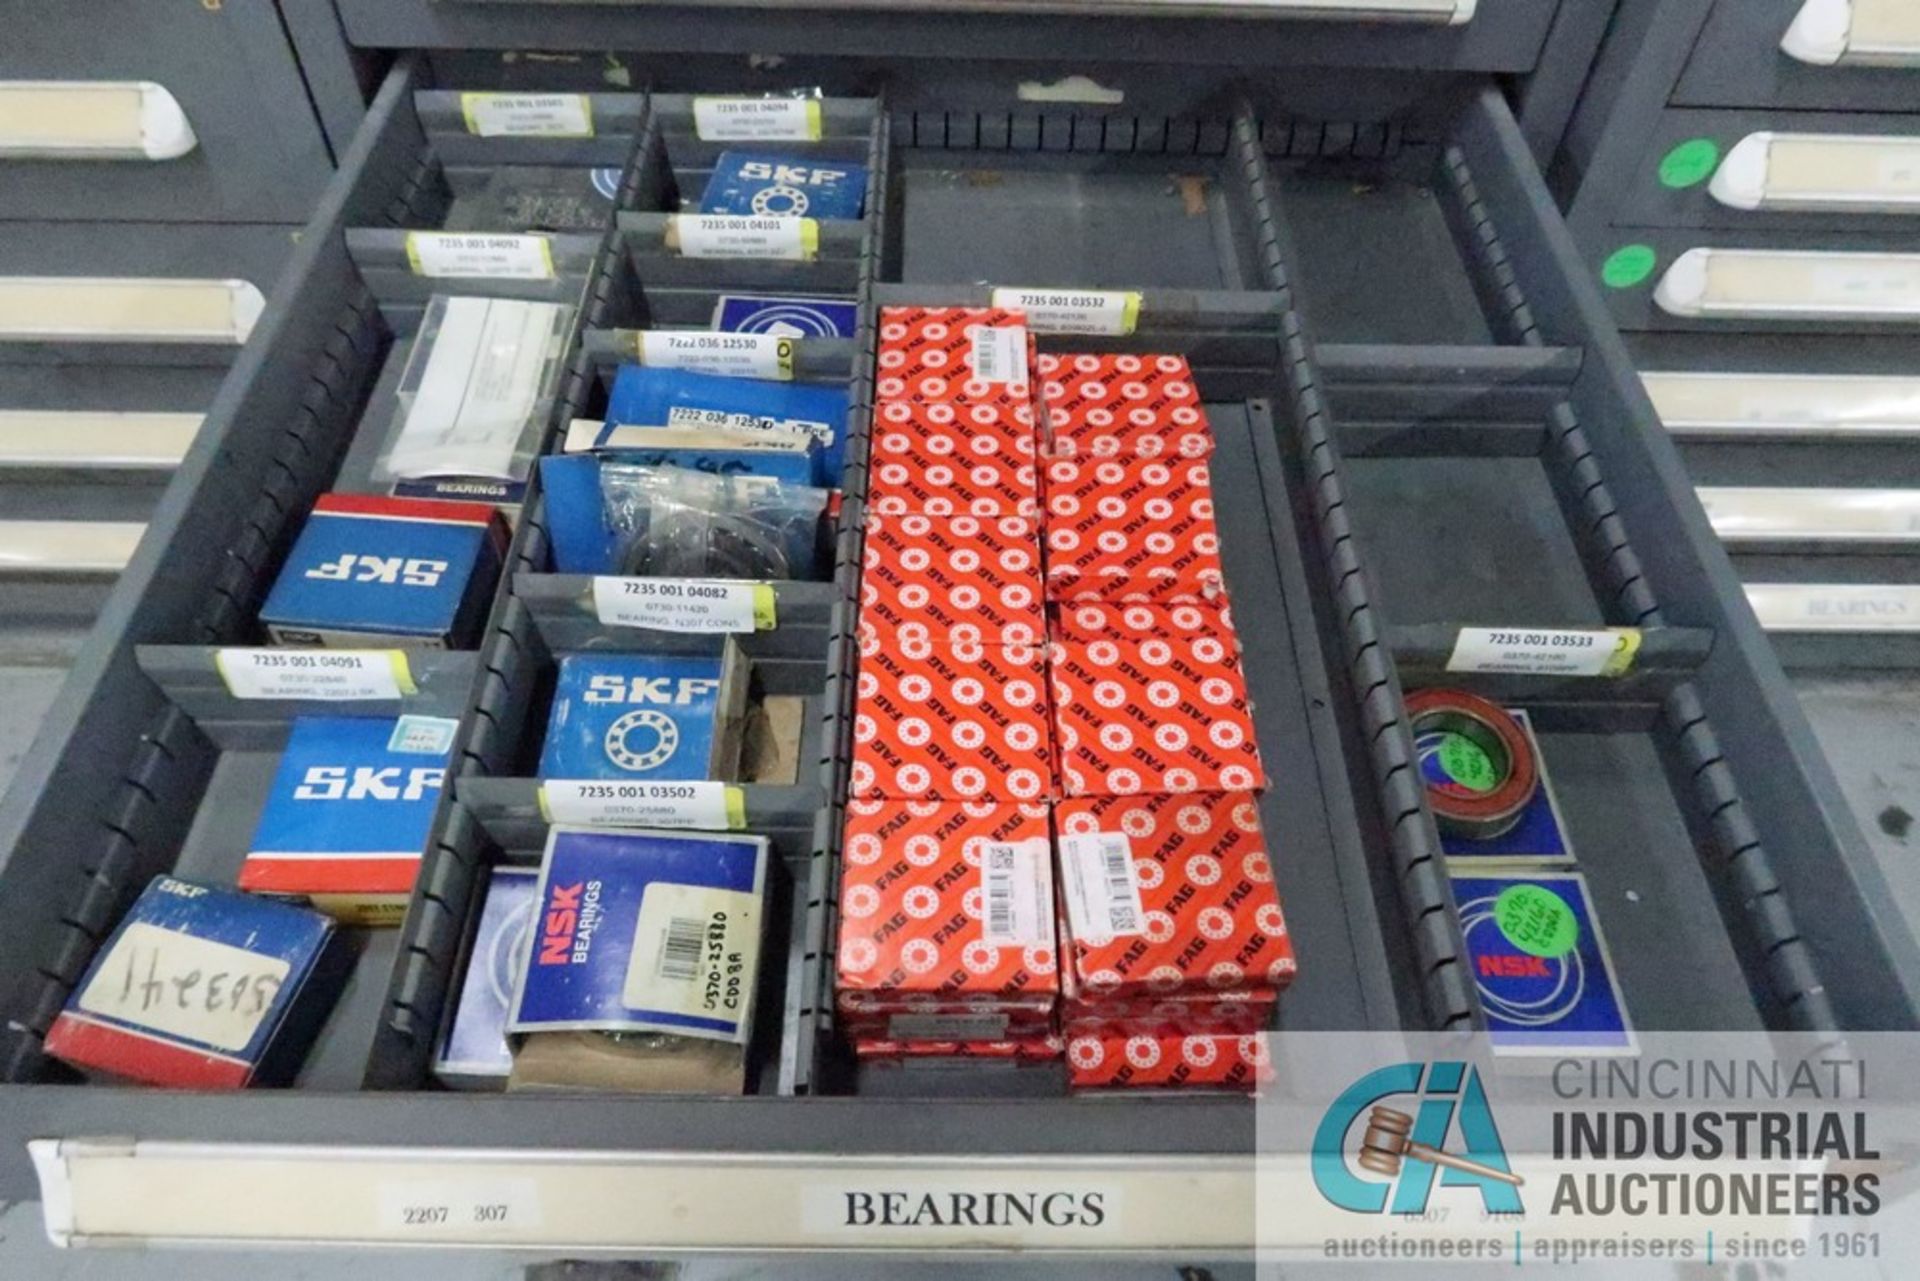 13-DRAWER VIDMAR CABINET WITH CONTENTS INCLUDING MISCELLANEOUS BEARINGS (CABINET CD) - Image 11 of 14